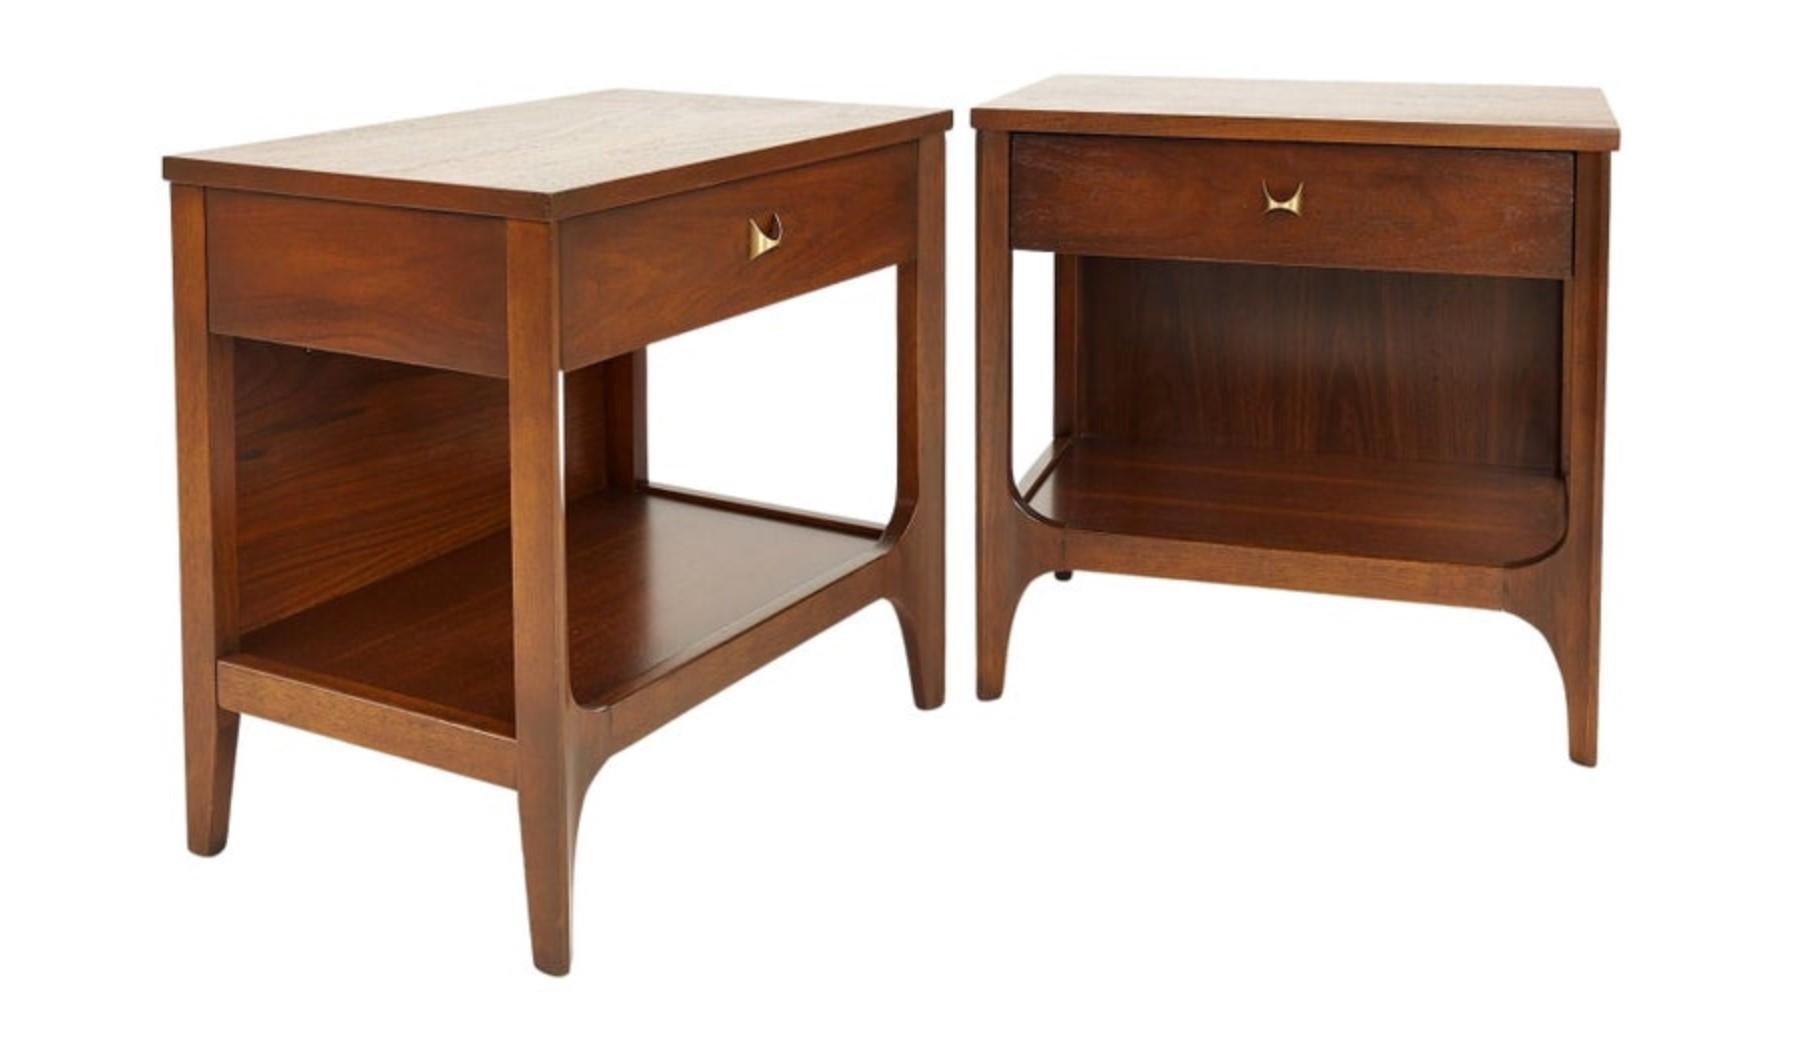 This fantastic pair of nightstands or end tables was built in the 1970s by high-end manufacturer Broyhill for their Brasilia line of furntiure. Since then, the Brasilia line has become more desirable, and original sets are difficult to come by.